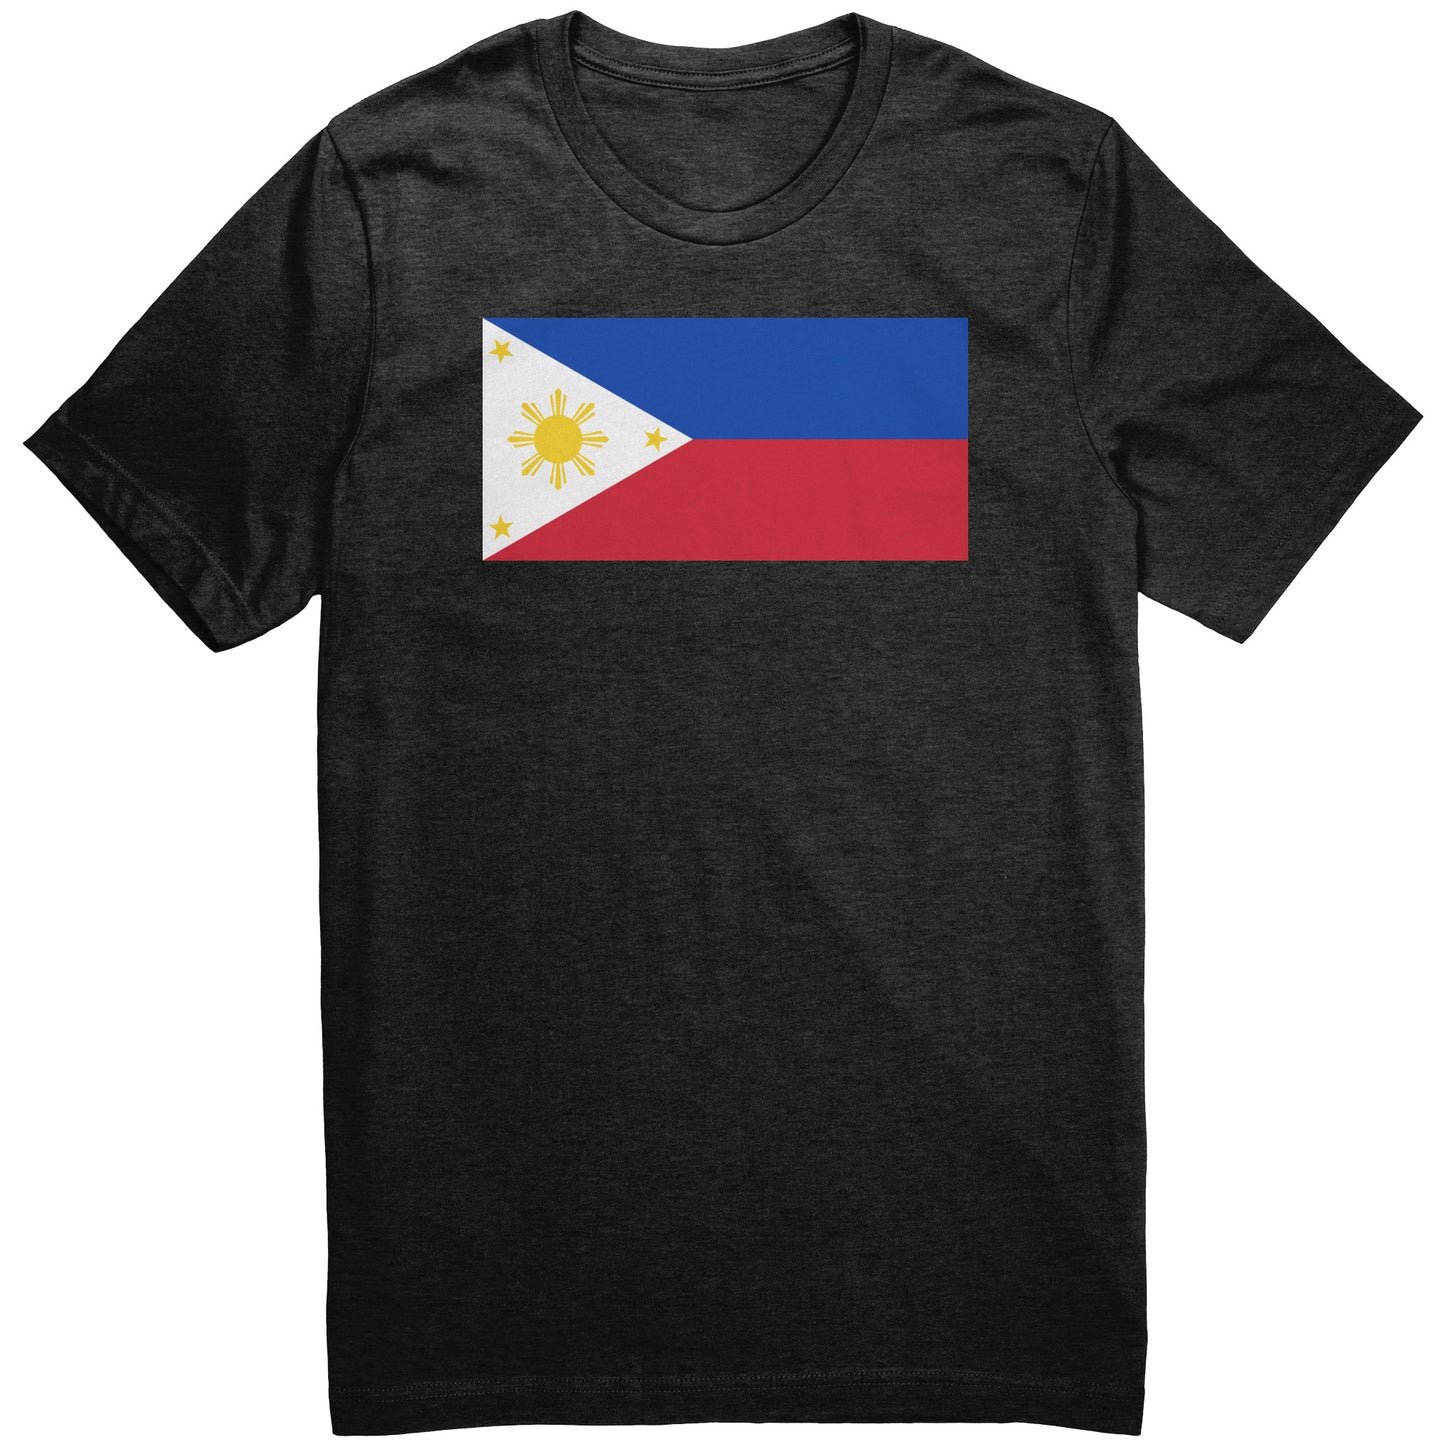 The flag of the Philippines